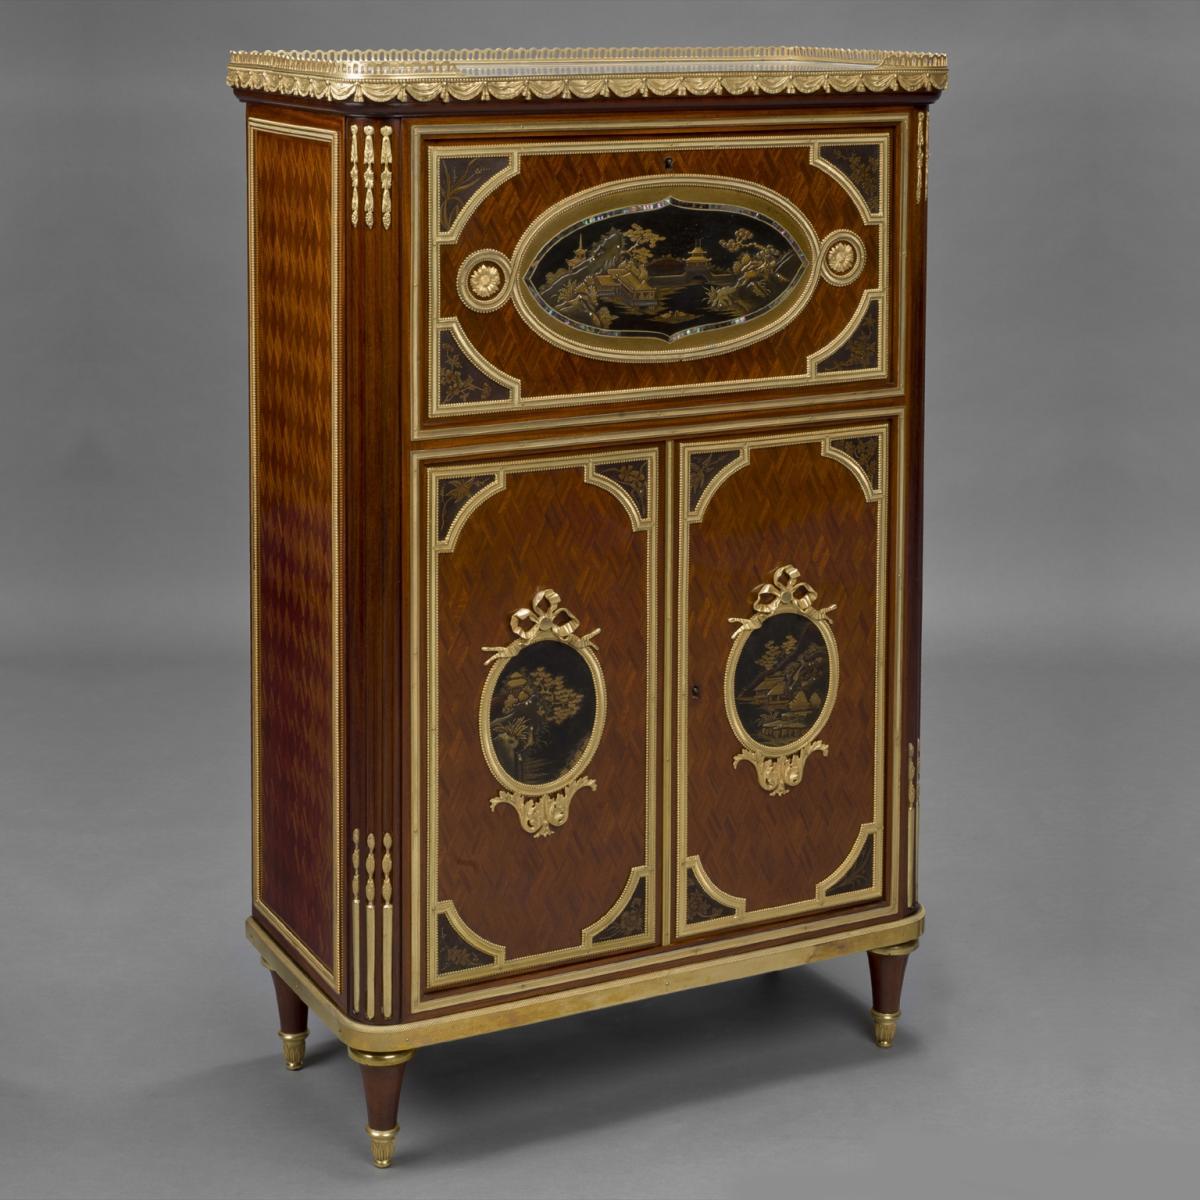 Louis XVI Style Parquetry, Gilt-Bronze and Lacquer Mounted Petit Secretaire Cabinet, Attributed to Maison Beurdeley